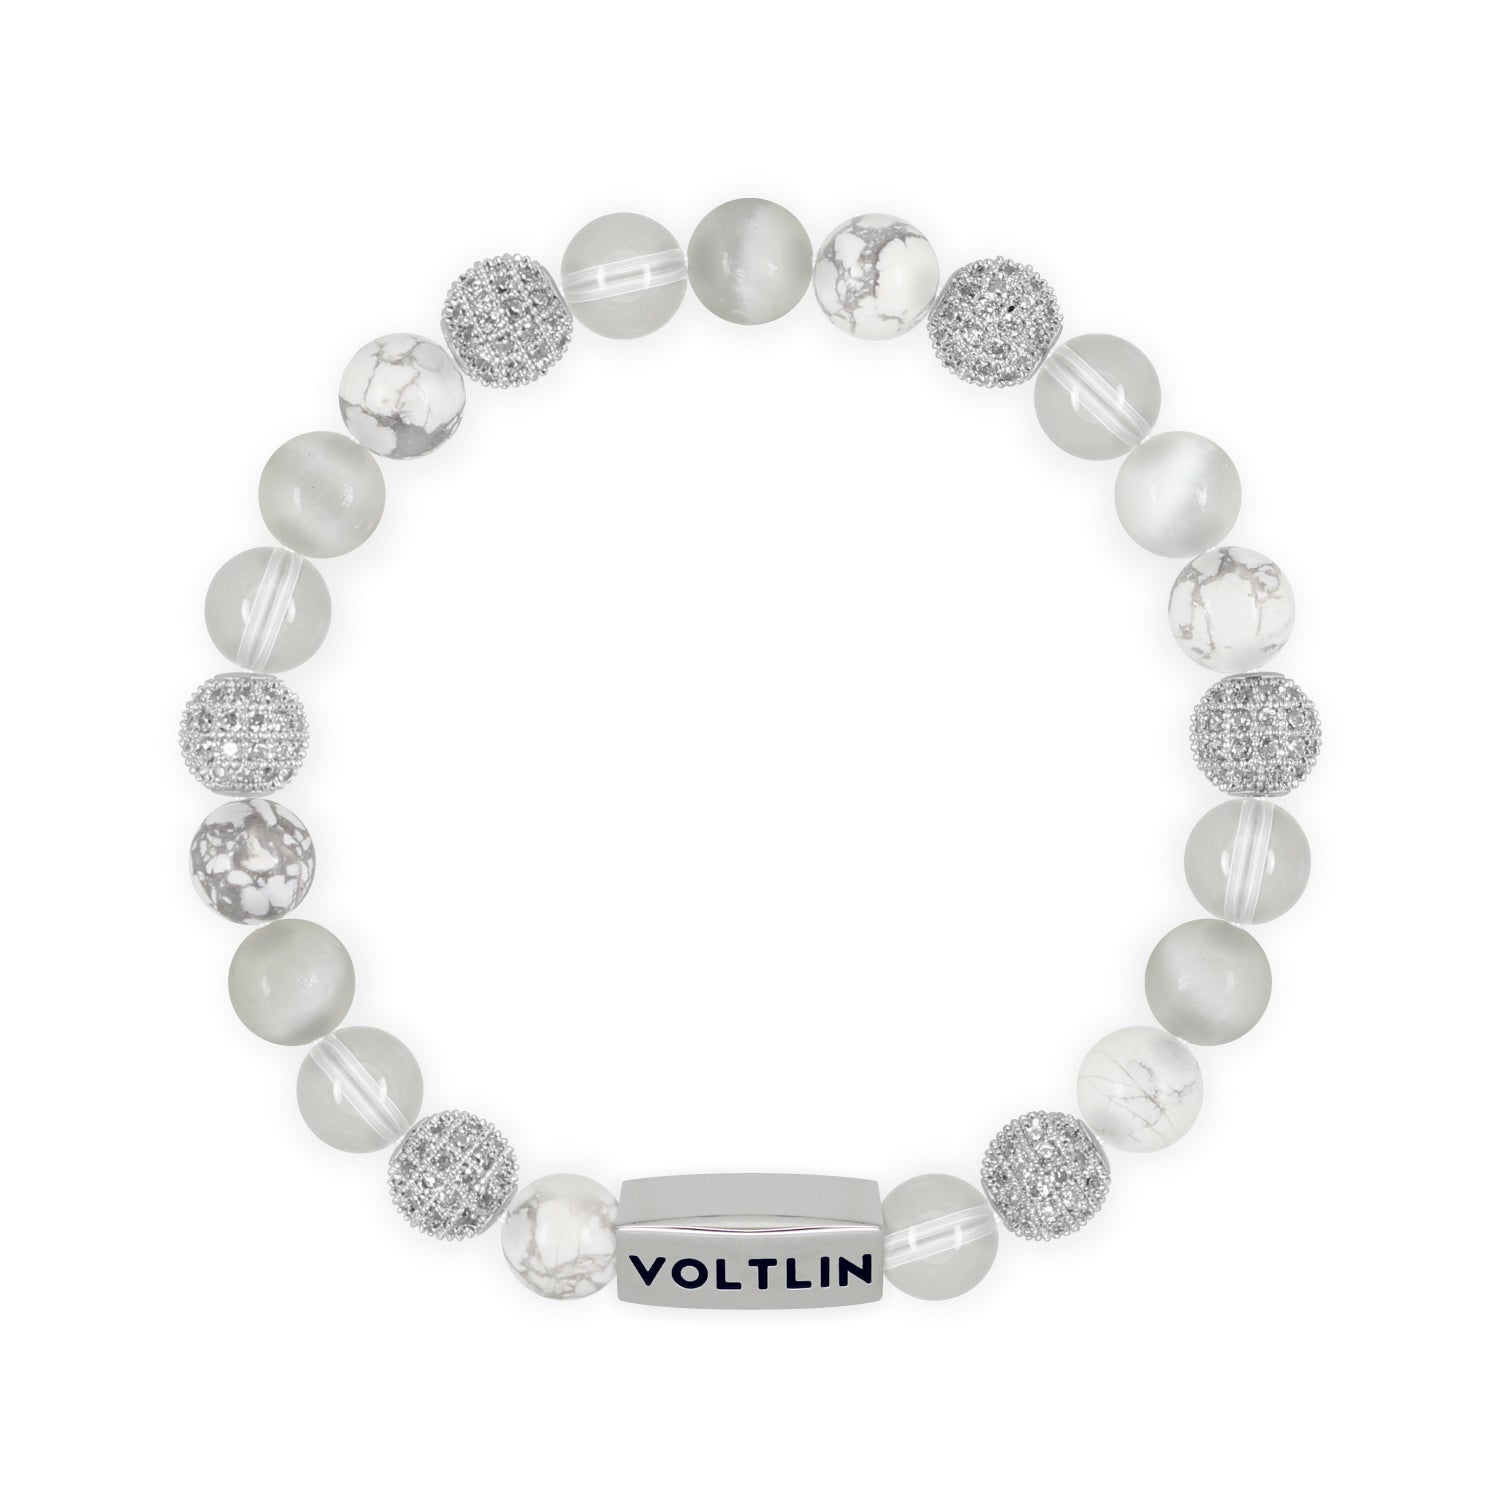 Front view of an 8mm White Sirius beaded stretch bracelet featuring Howlite, Silver Pave, Quartz, & Selenite crystal and silver stainless steel logo bead made by Voltlin